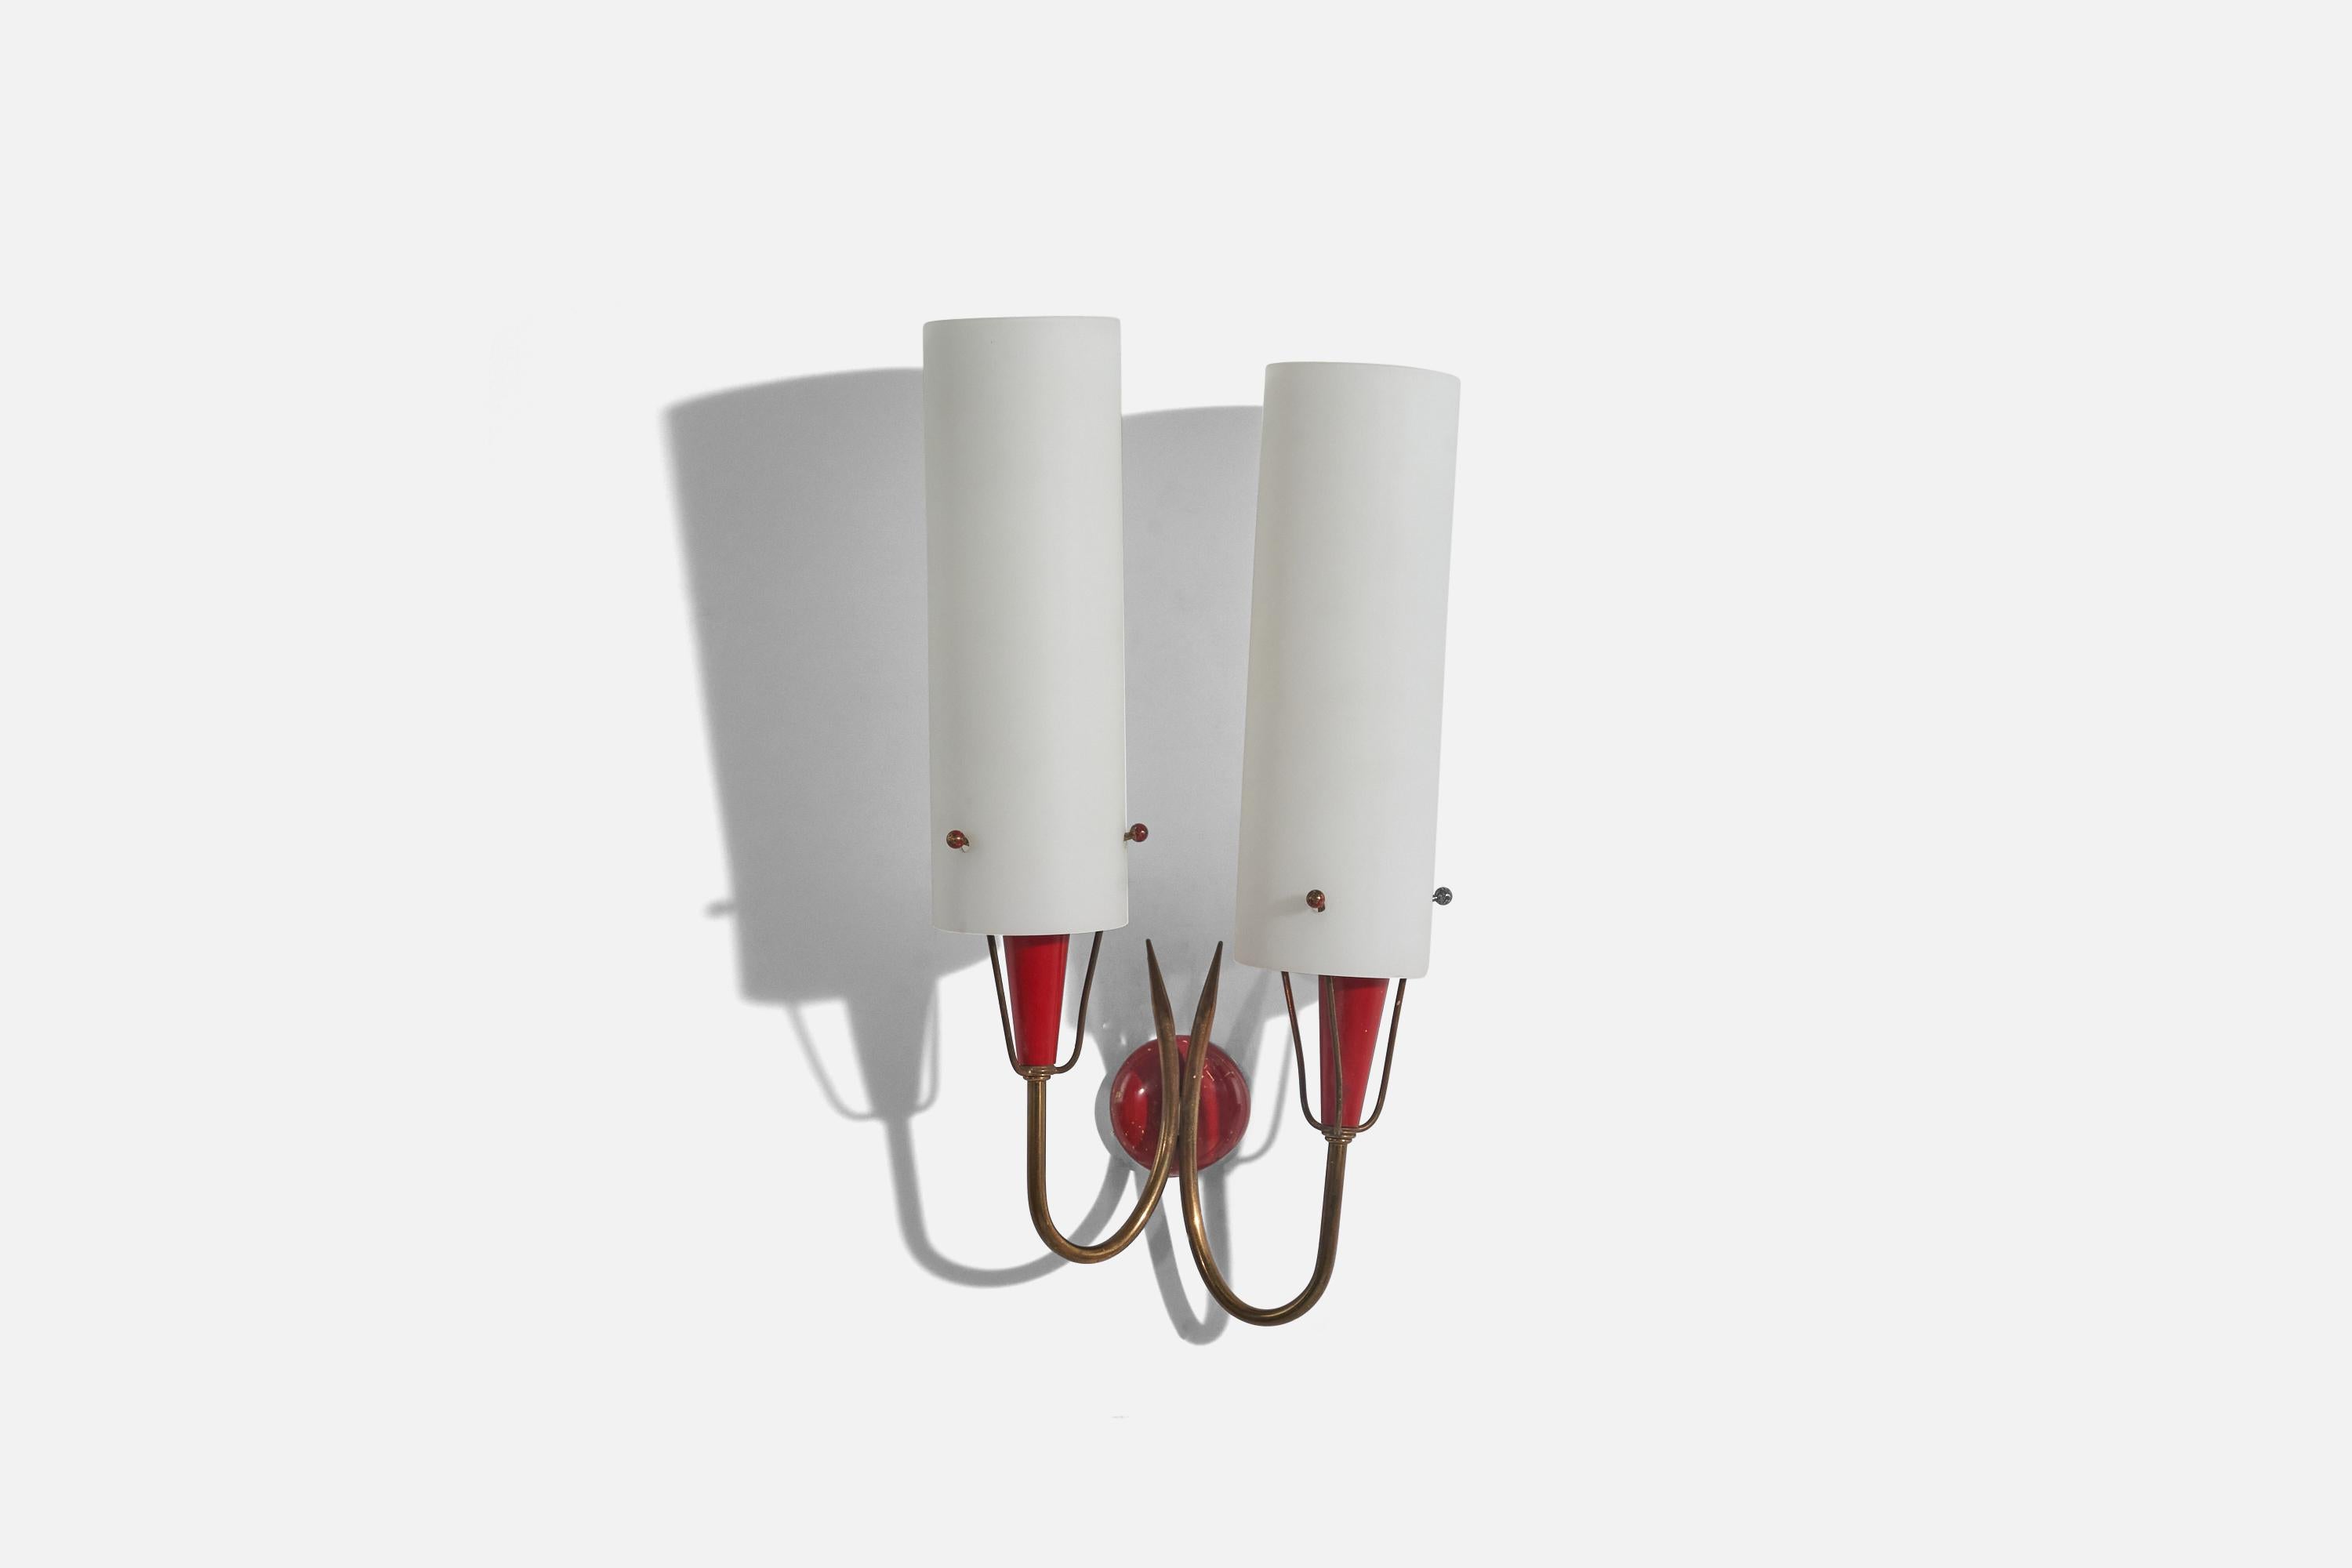 A pair of two-armed brass, red-lacquered metal and glass wall lights designed and produced by an Italian designer, Italy, 1950s.

Dimensions of back plate (inches) : 2.38 x 2.38 x 0.60 (height x width x depth).

Socket takes E-14 bulb. 
There